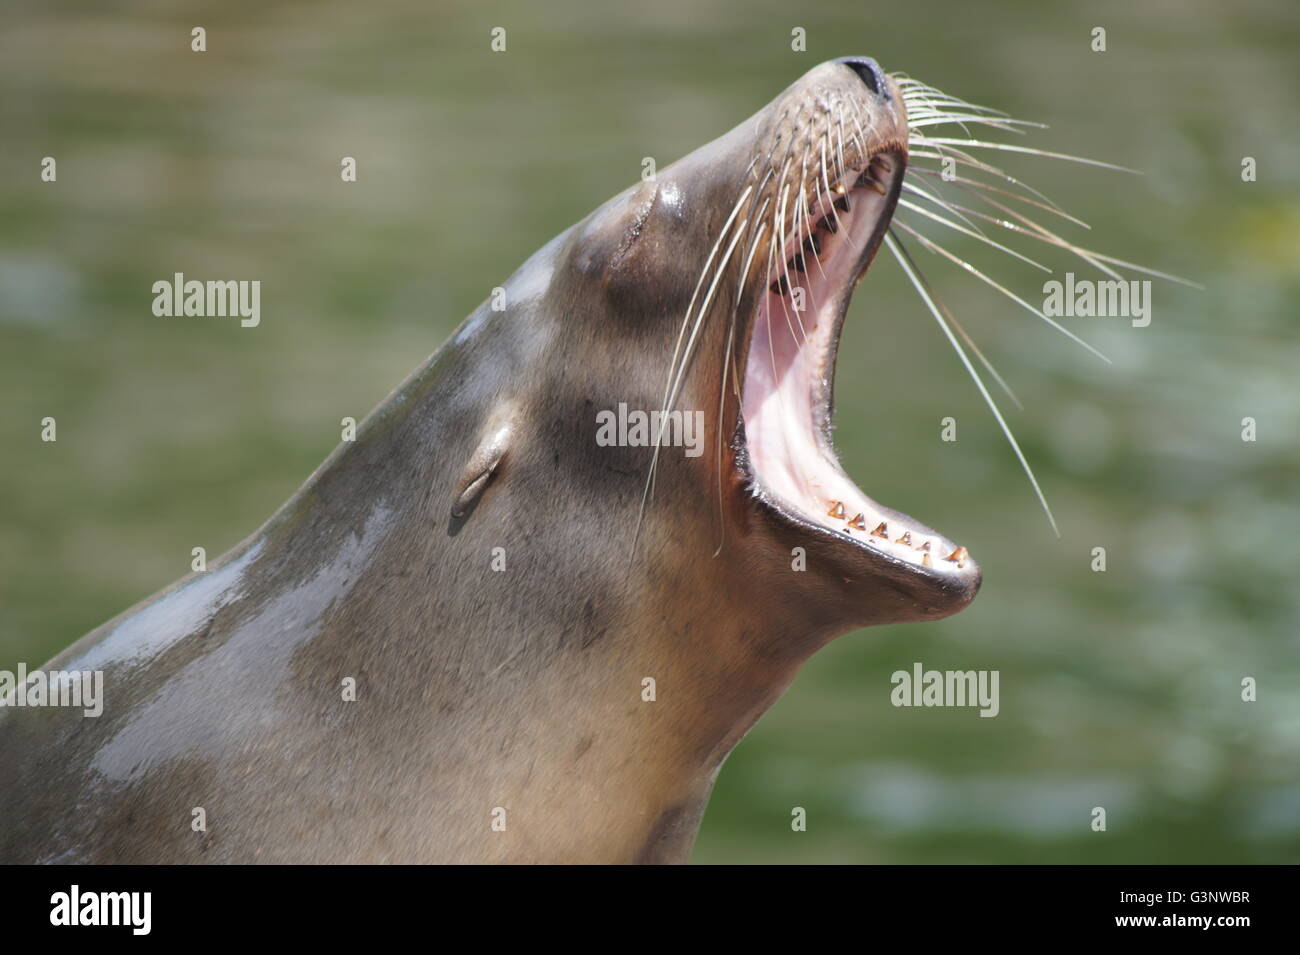 A sealion bellowing Stock Photo